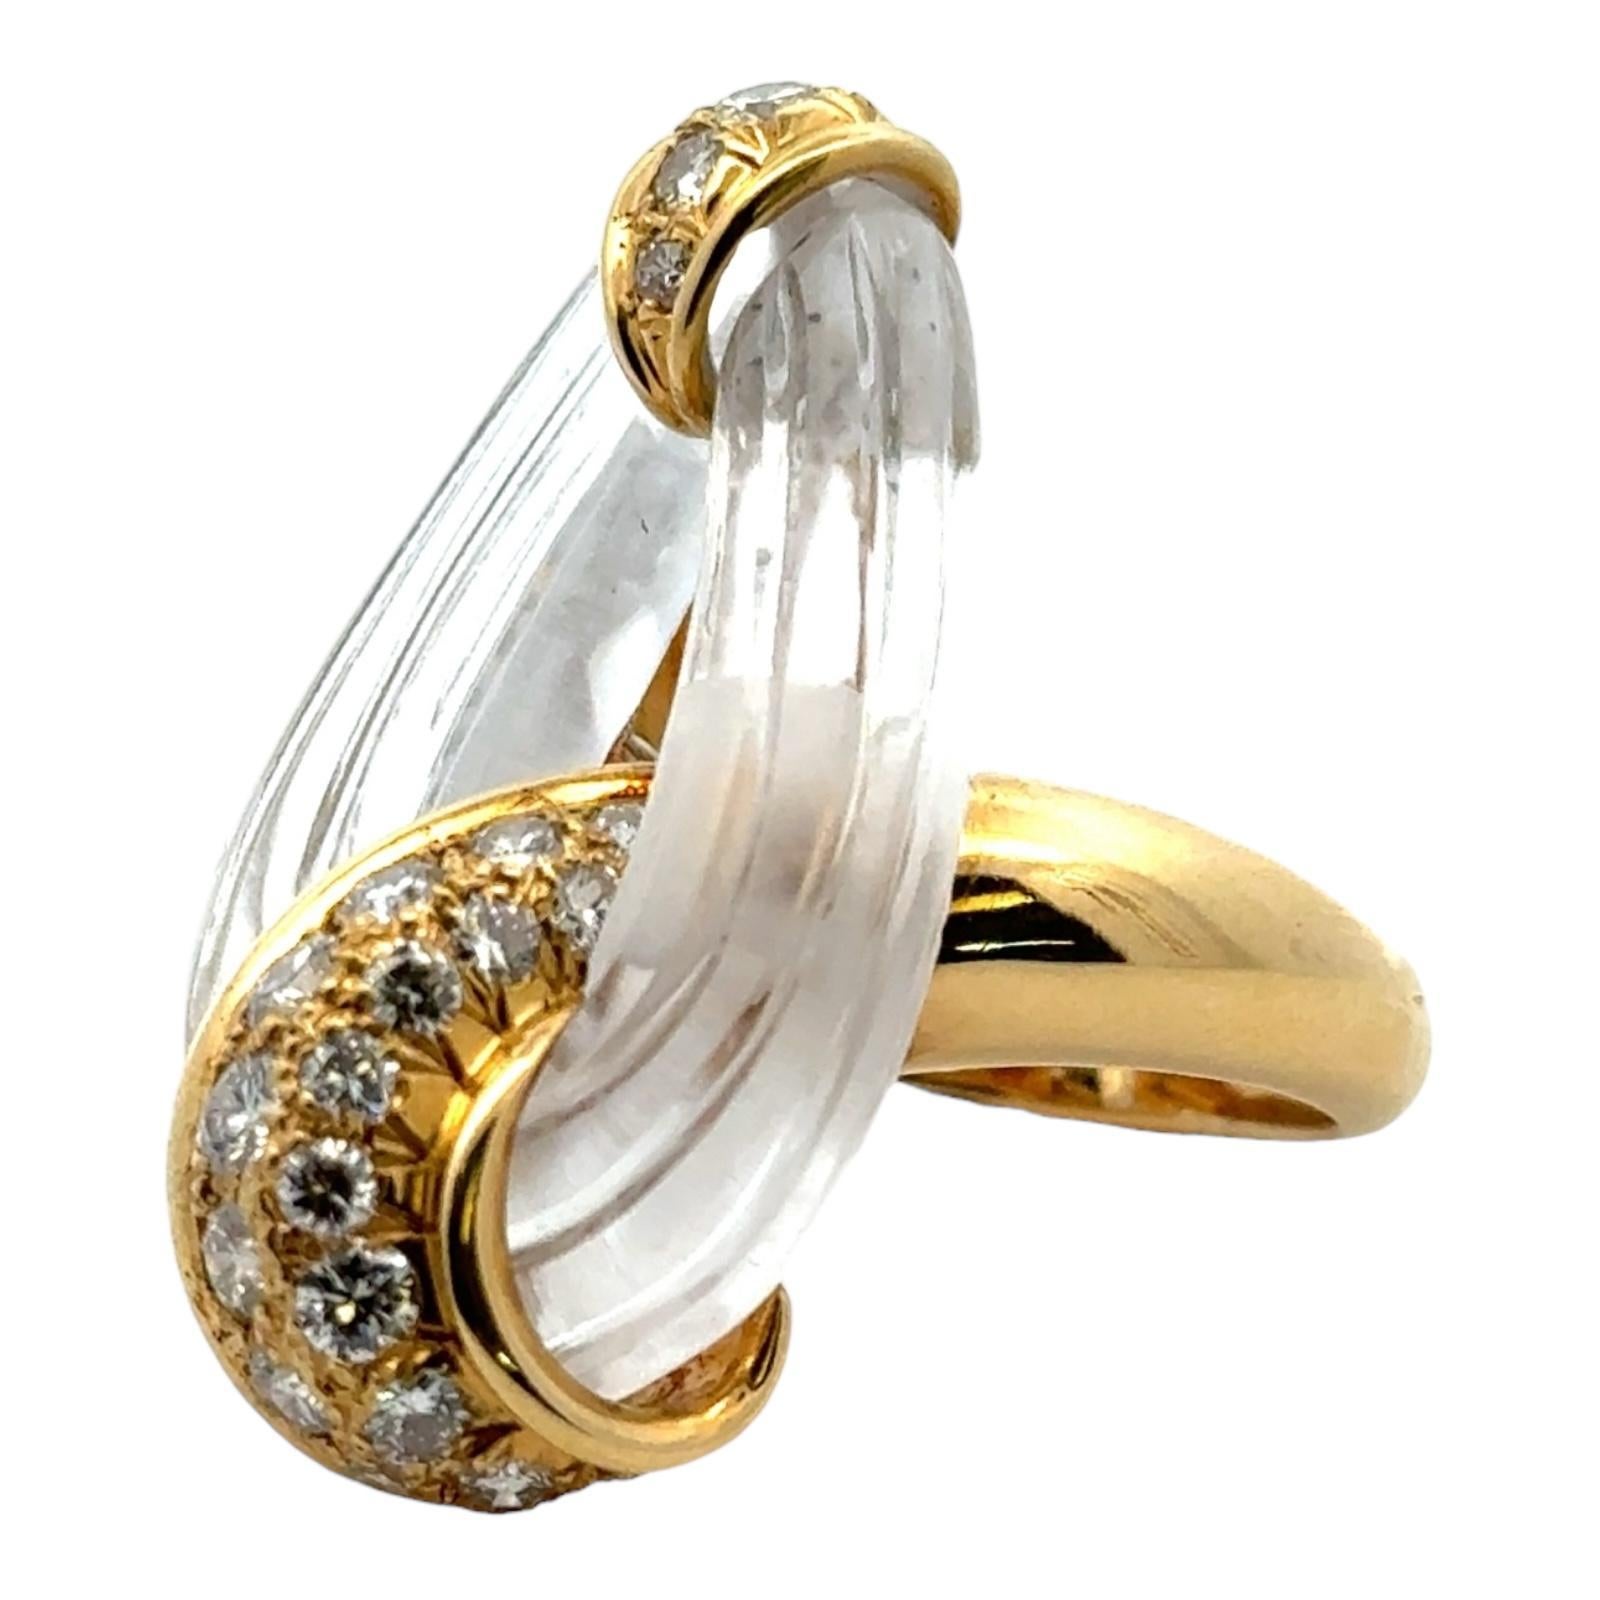 Women's French Contemporary Rock Crystal Diamond 18 Karat Yellow Gold Cocktail Ring